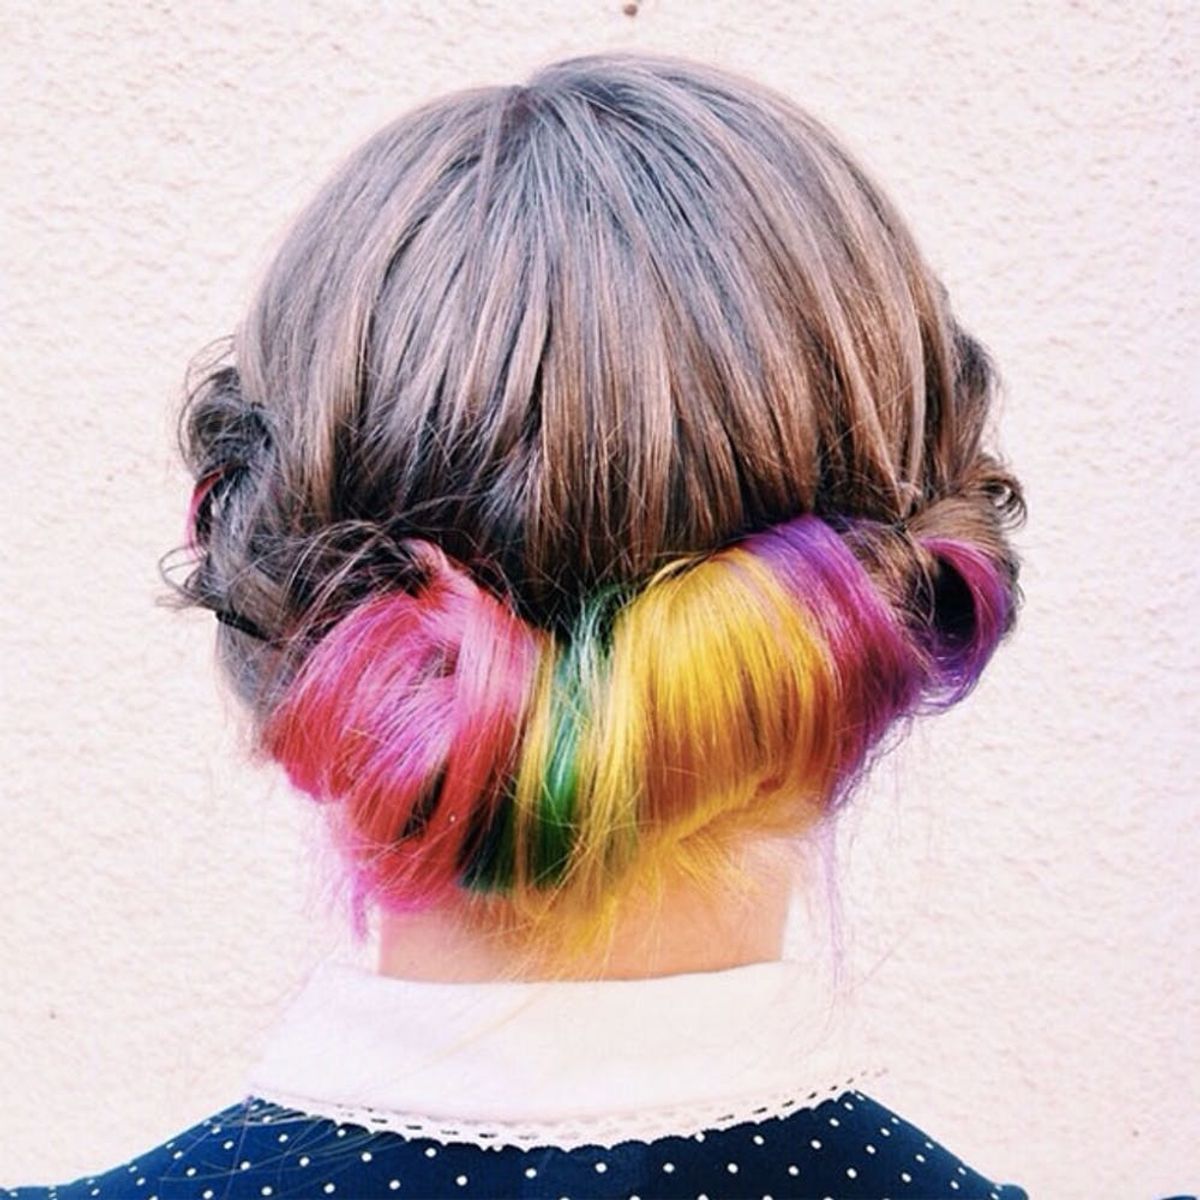 Secret Rainbow Hair Is the Crazy Color Trend MADE for Preppy Girls